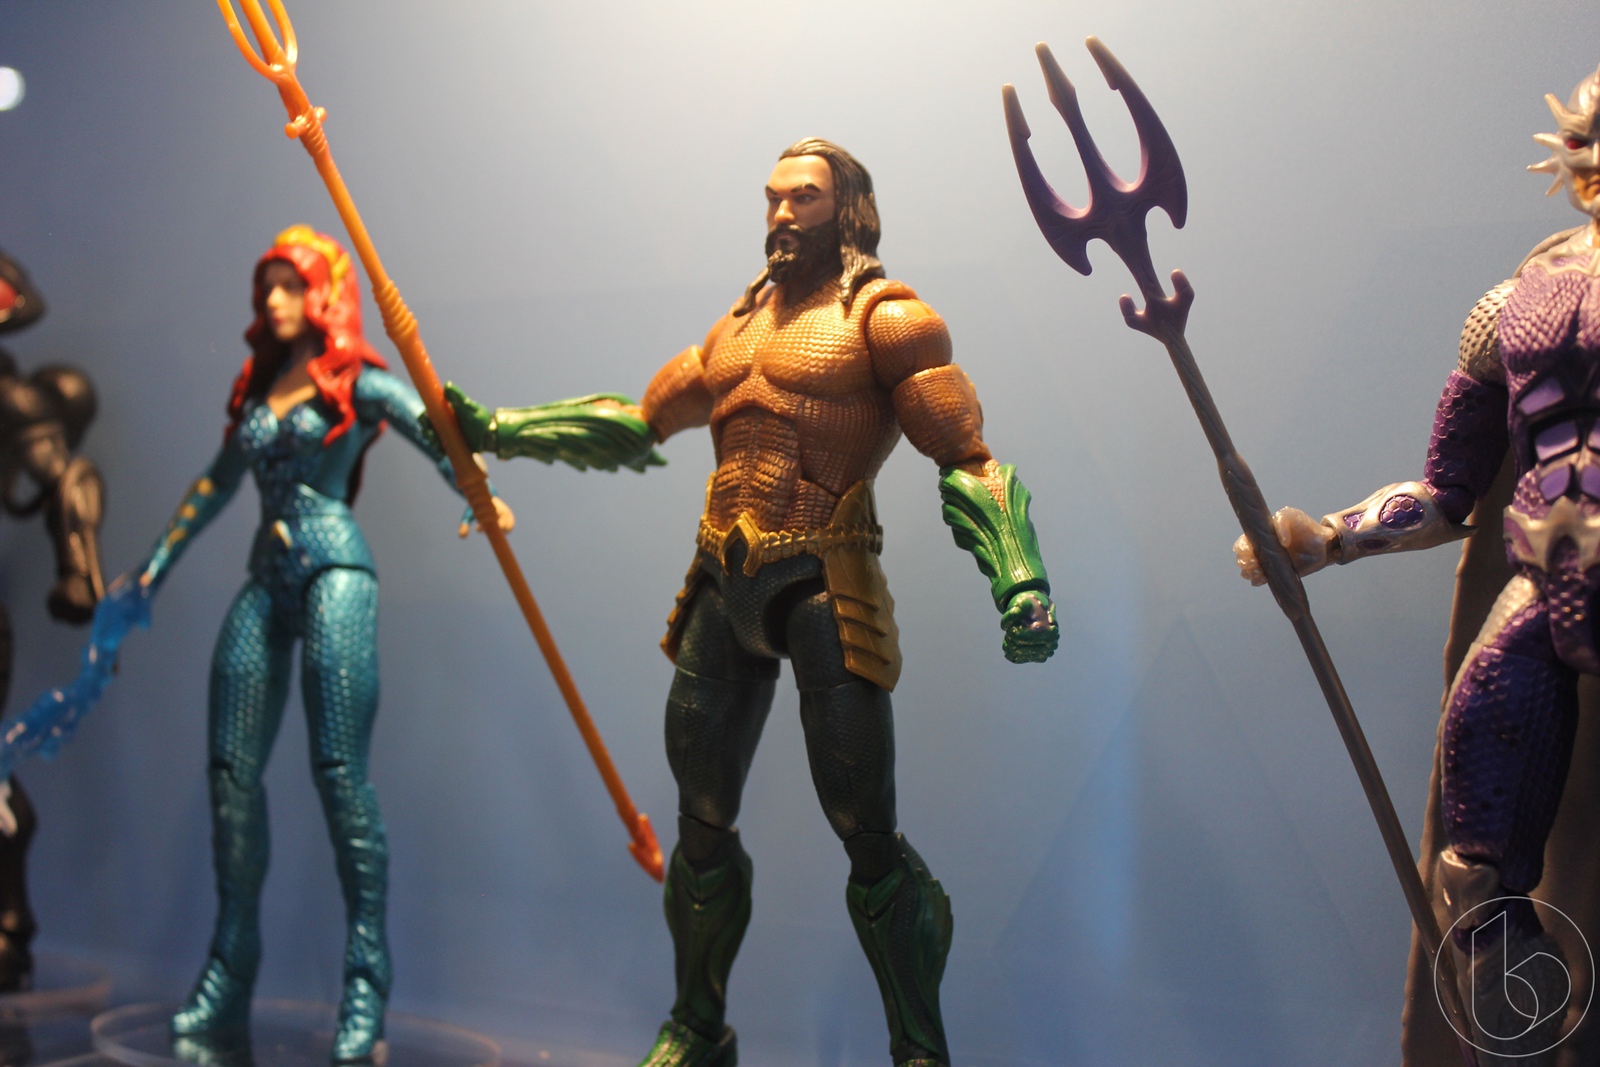 Aquaman Toys at SDCC 2018 - It Was a Water Wonderland 